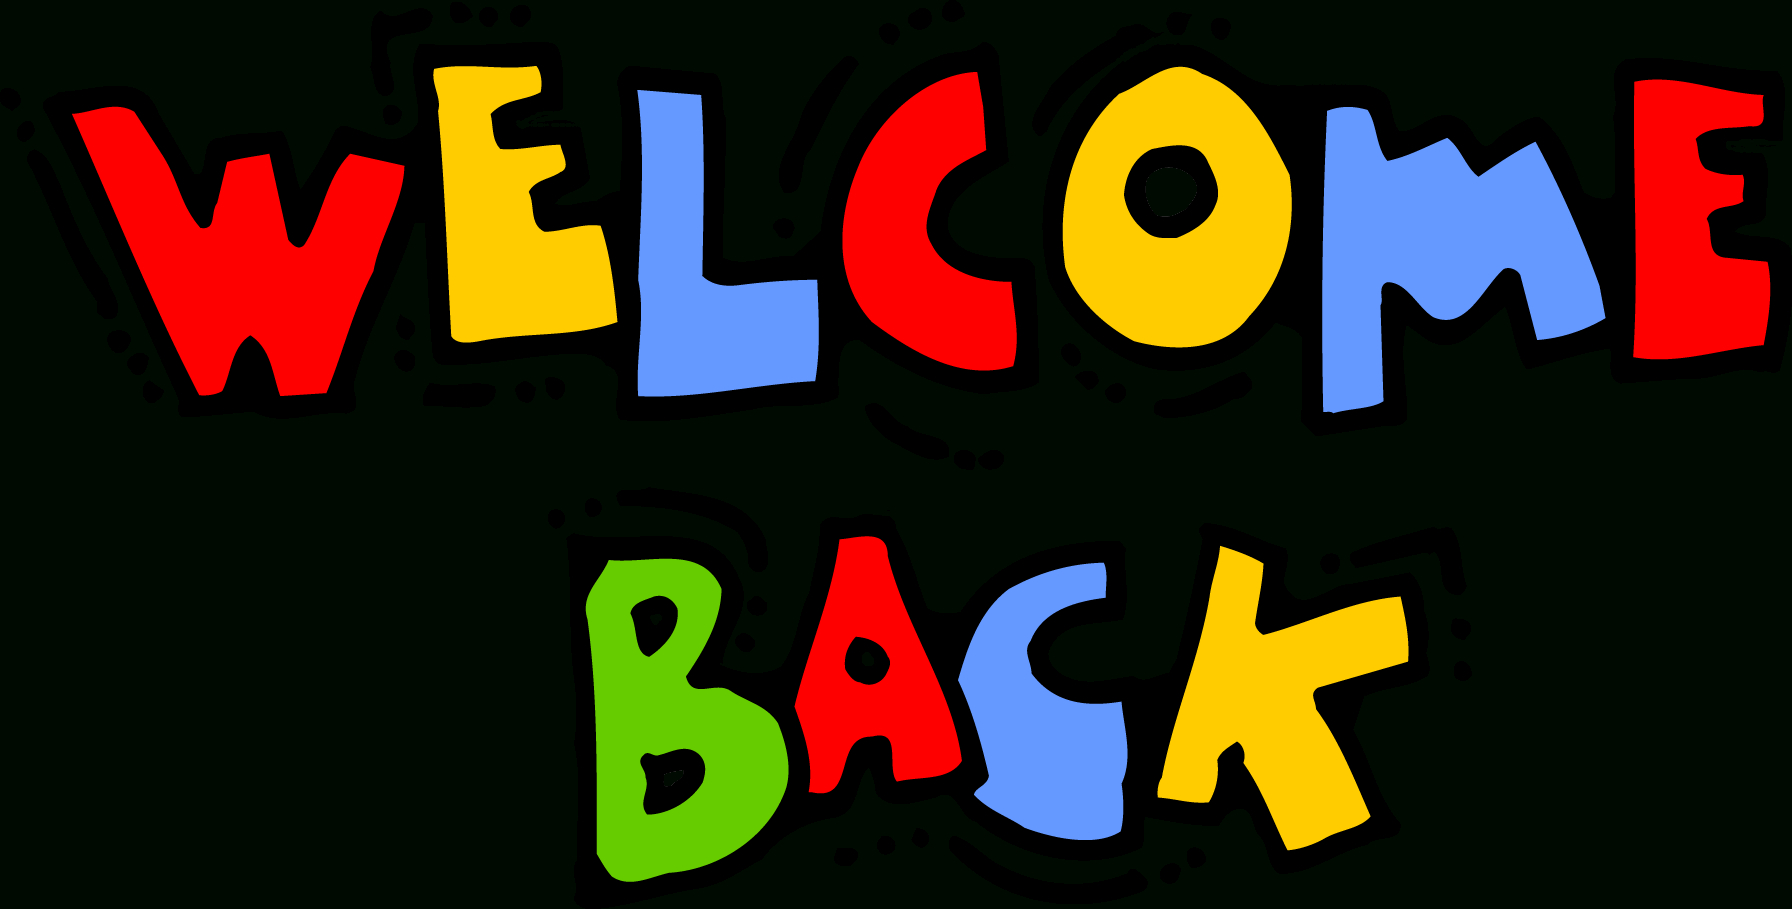 Welcome Back Signs Free Printable